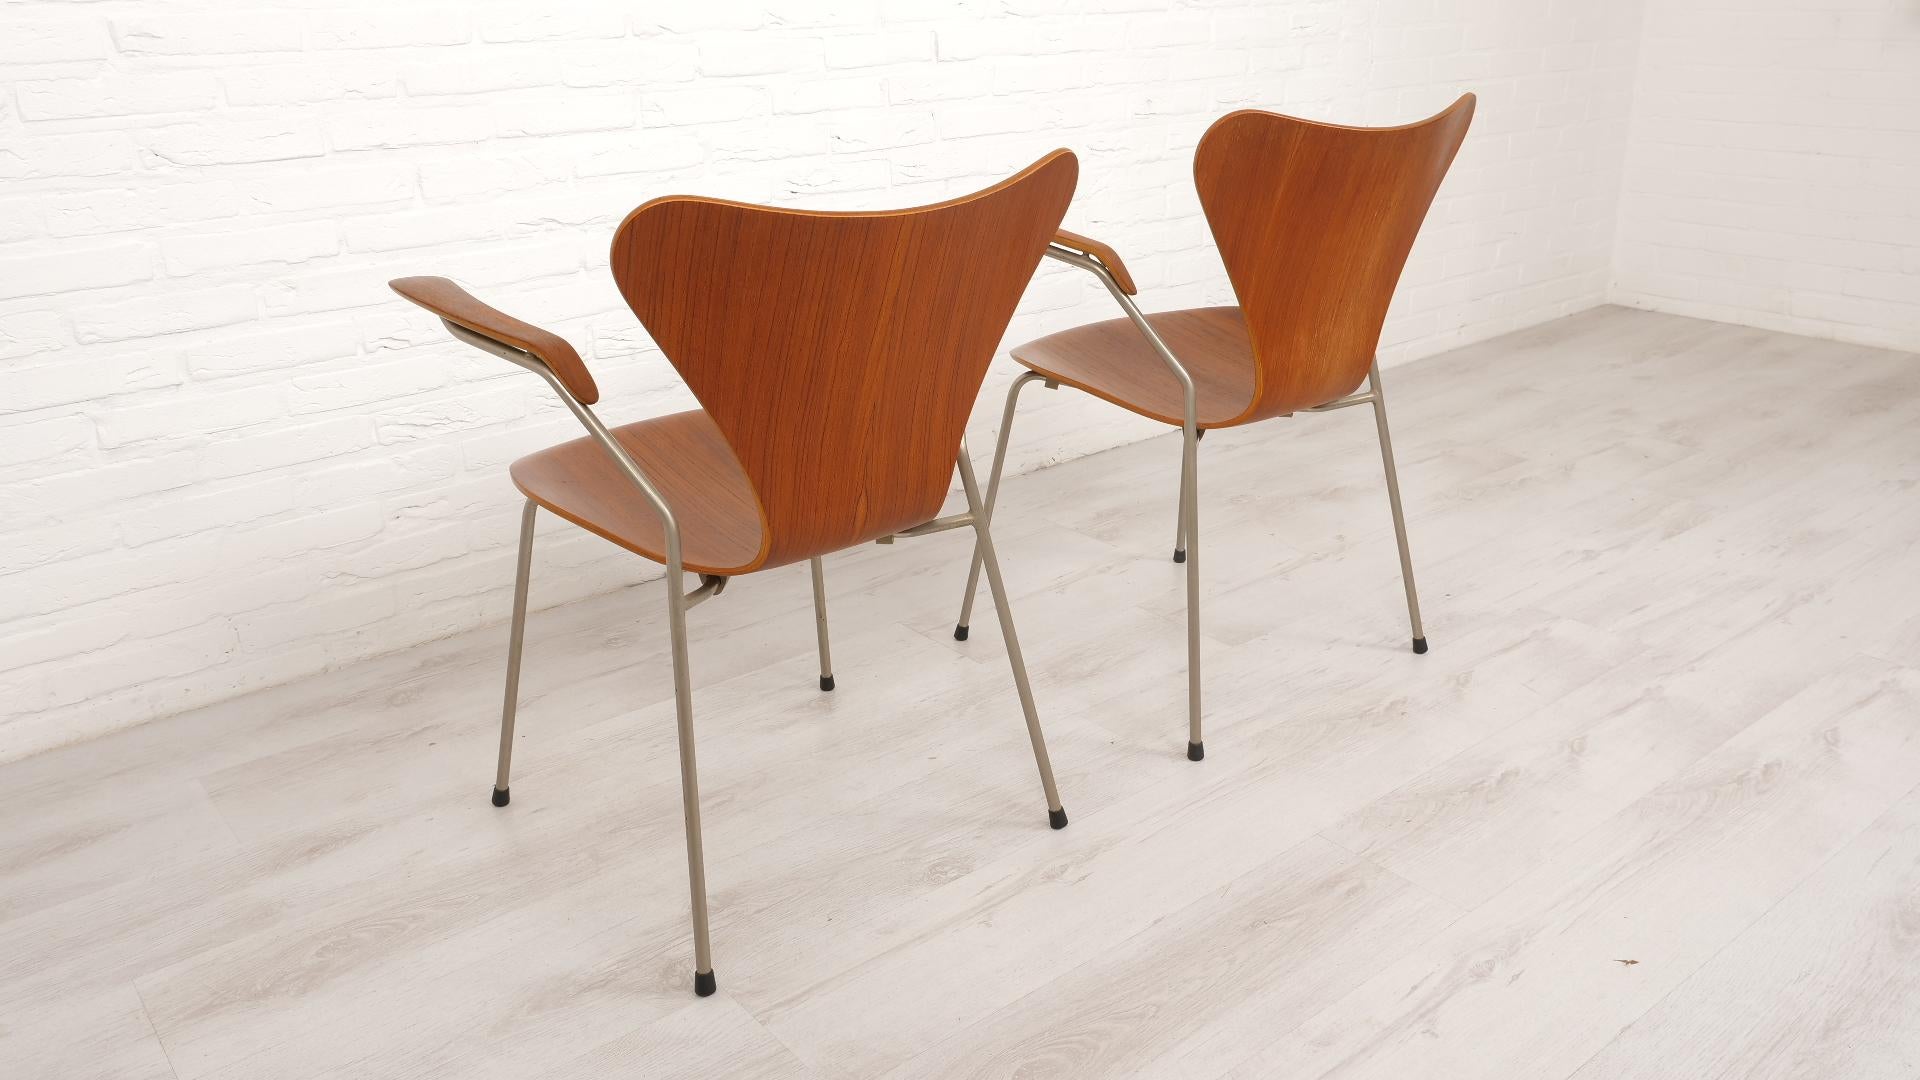 2 Vintage butterfly chairs with armrests by Arne Jacobsen model 3207 Teak For Sale 7